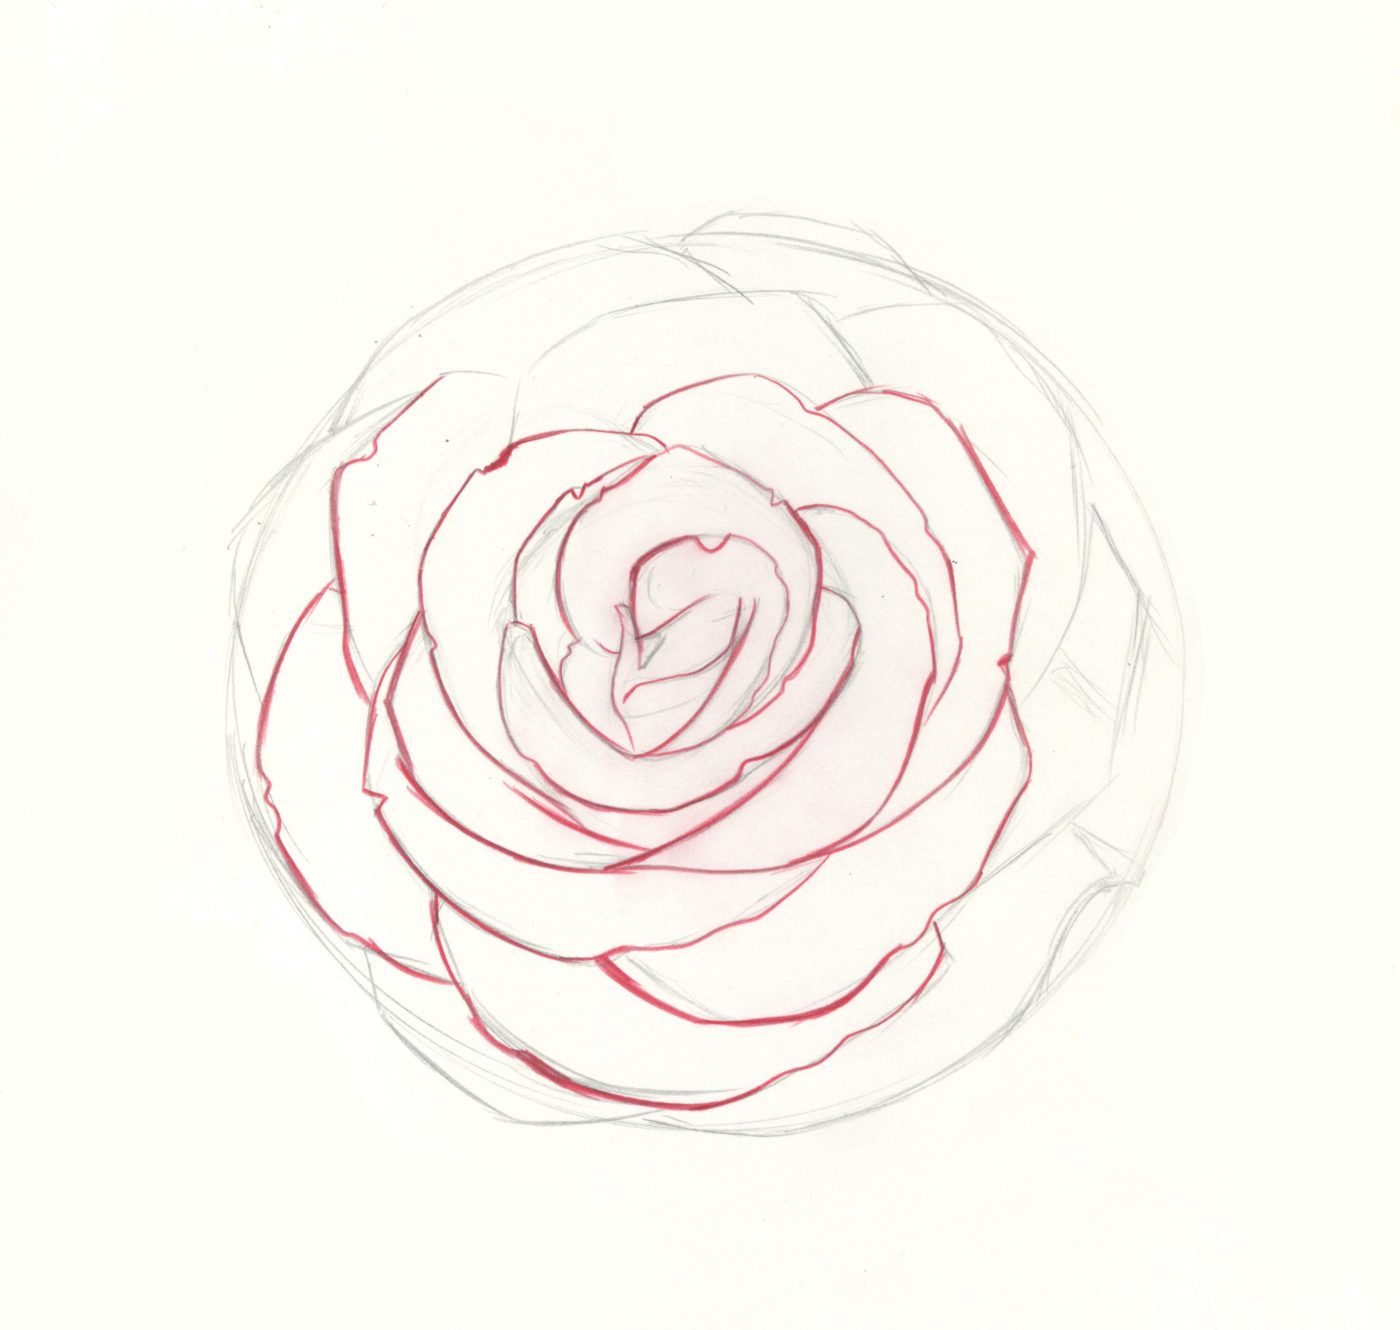 How to Draw Roses | An Easy and Complete Step-by-Step Guide